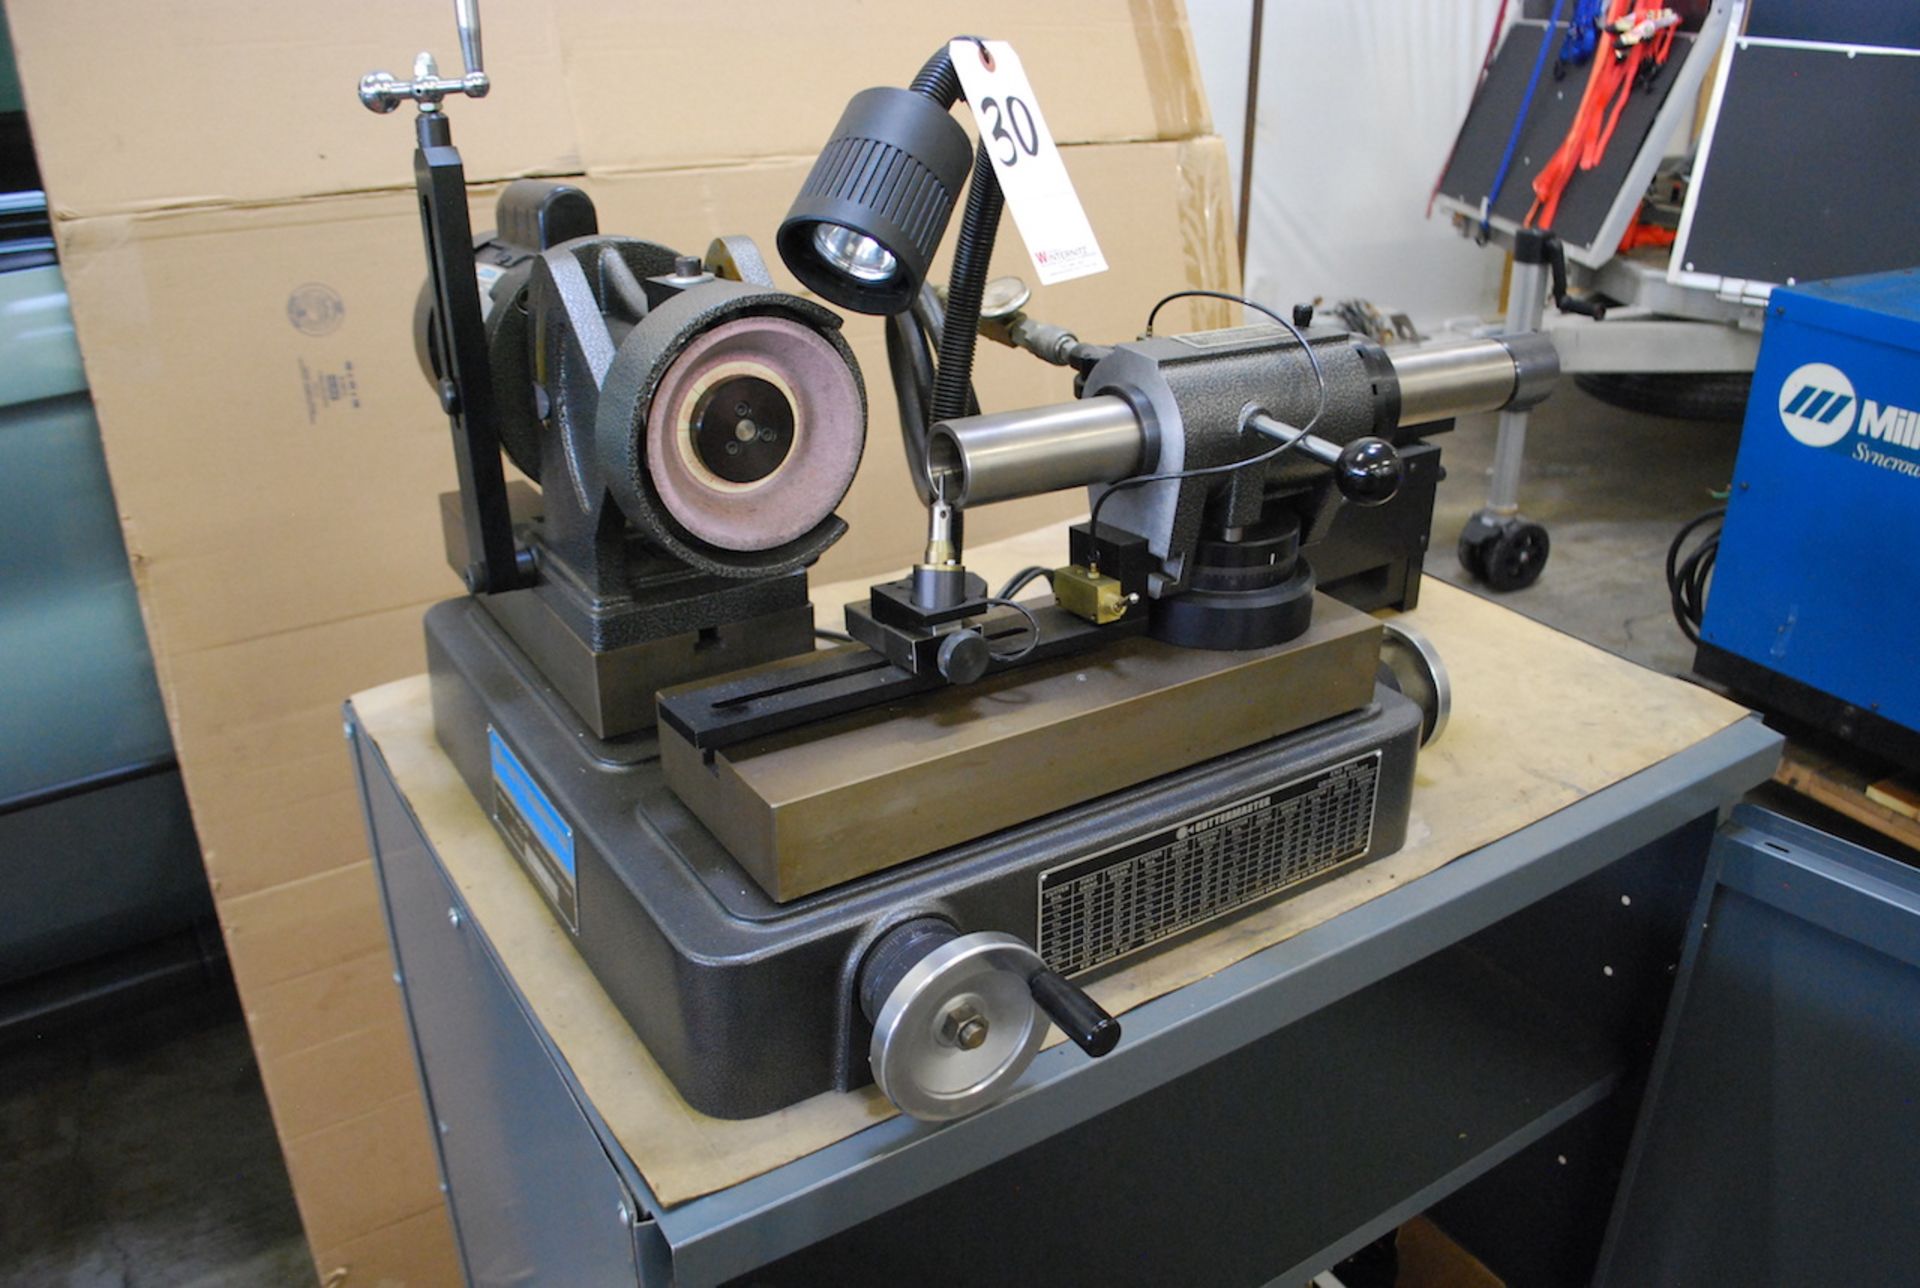 CUTMASTER MODEL MG-30 ENDMILL SHARPENER: S/N 5326; 1/3HP; CABINET W/ACCESSORIES.